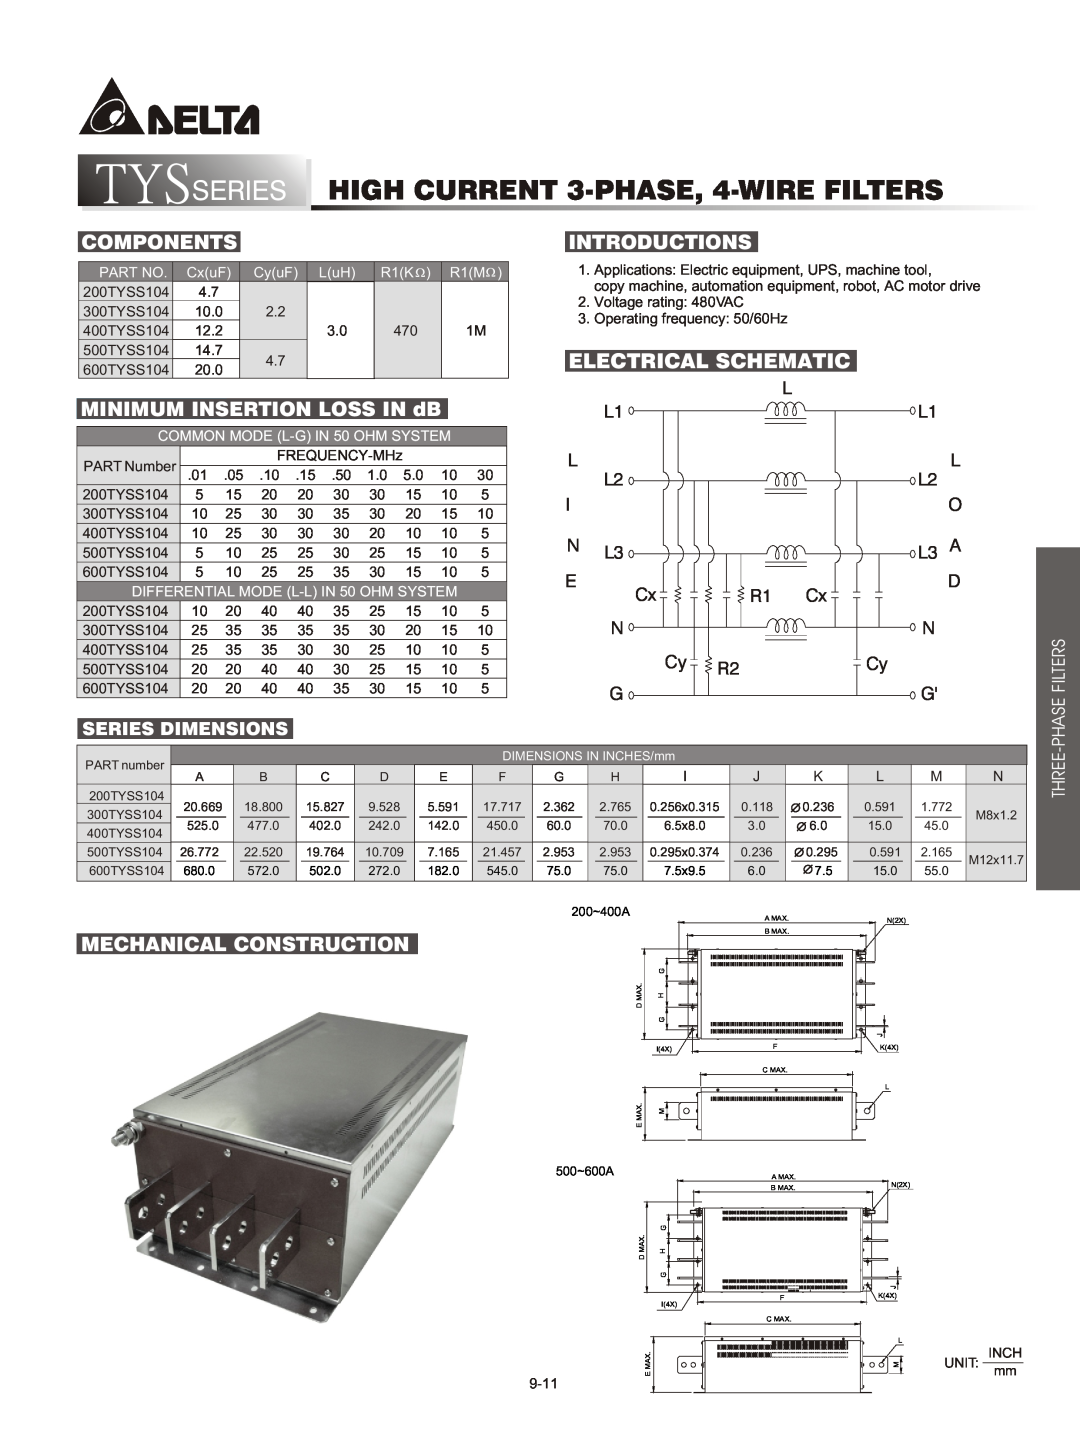 Delta Electronics DTD Series SERIES HIGH CURRENT 3-PHASE, 4-WIRE FILTERS, Series Dimensions, Phase Filters, Components 